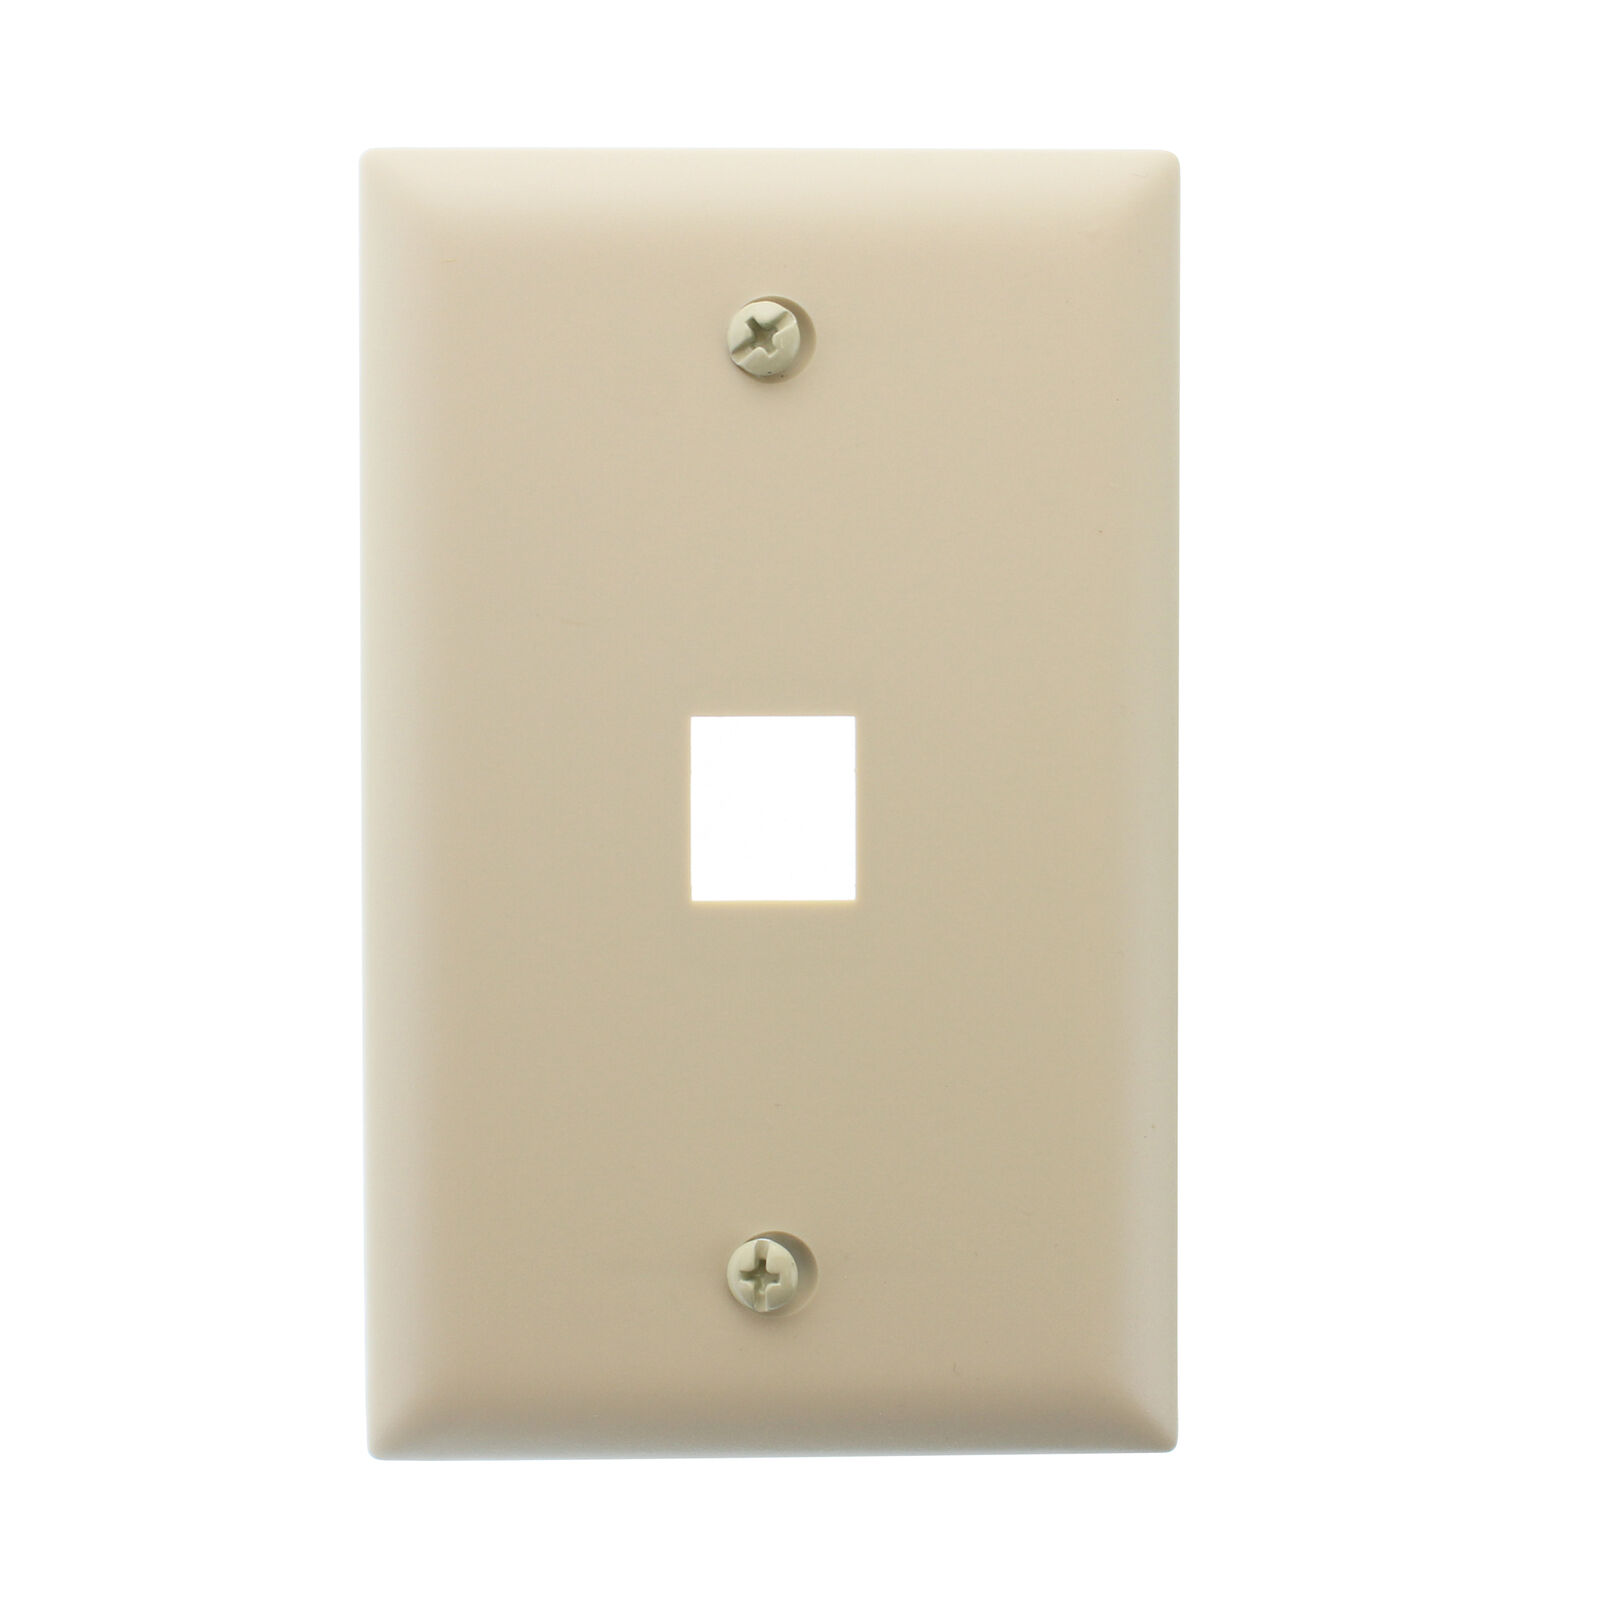 AMP TYCO TE 1-1479443-1 MODULAR ETHERNET FACE-PLATE, 1-PORT, IVORY